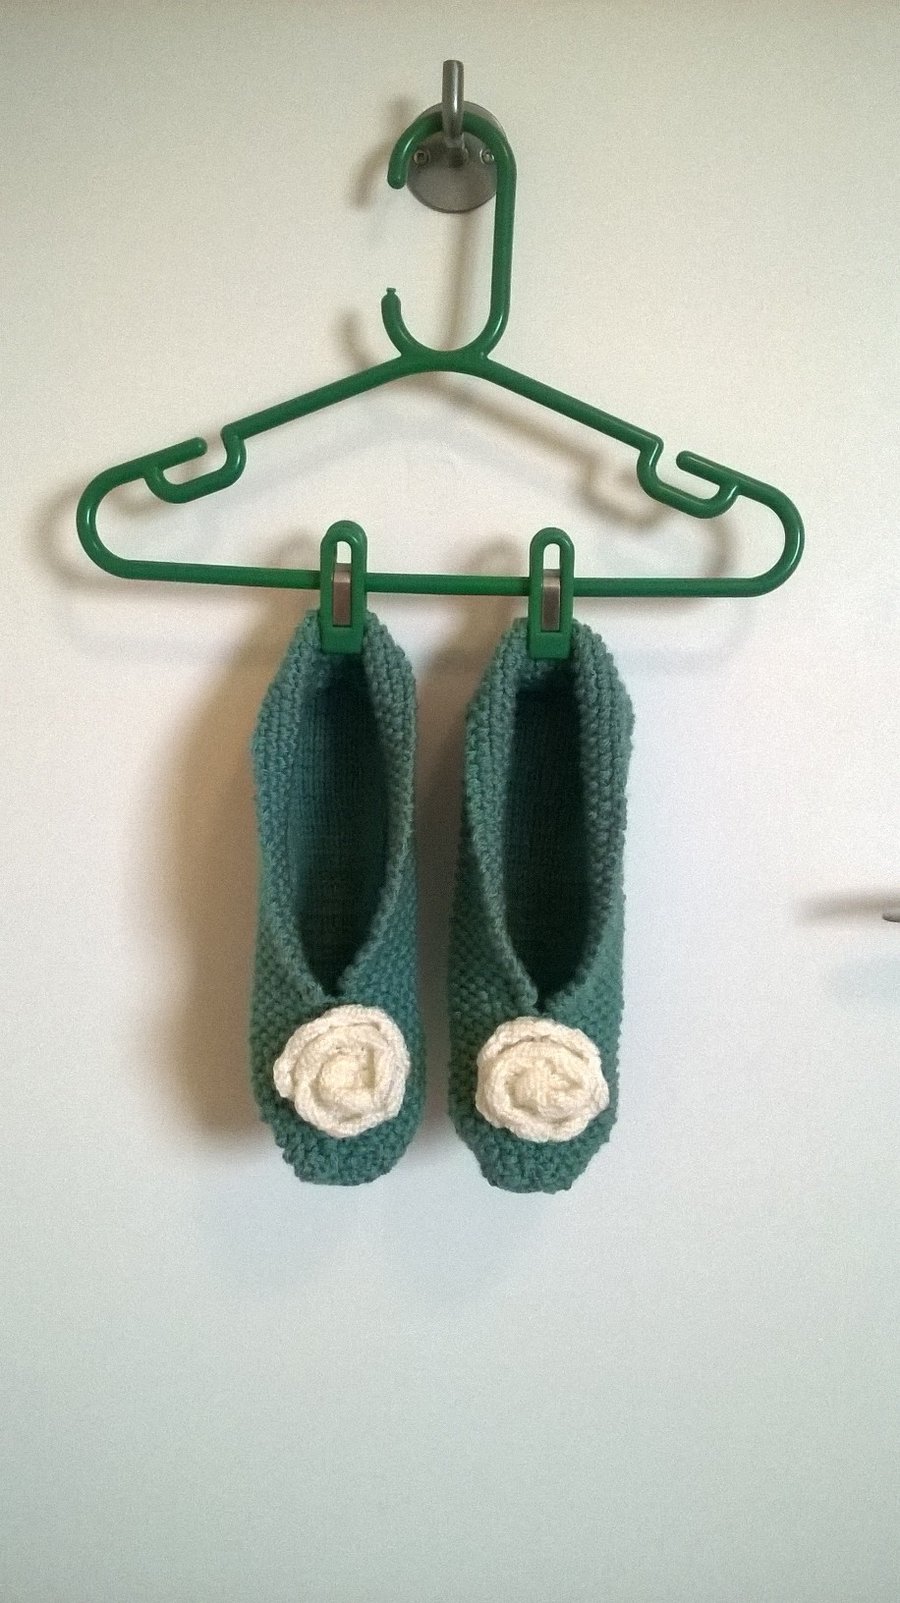 Vintage style knitted slippers